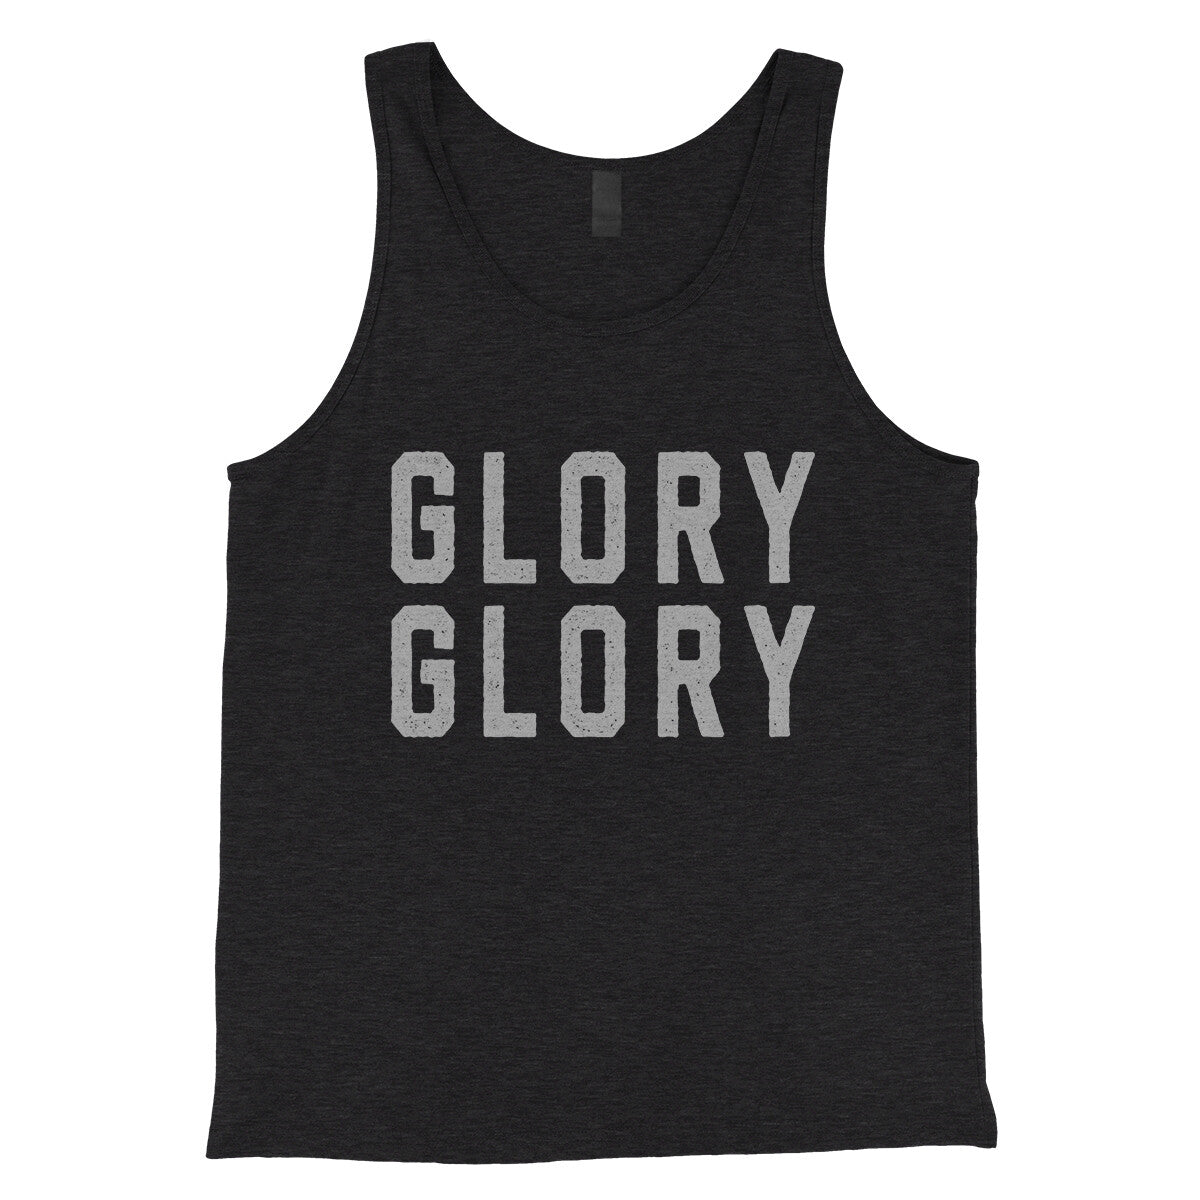 Glory Glory in Charcoal Black TriBlend Color